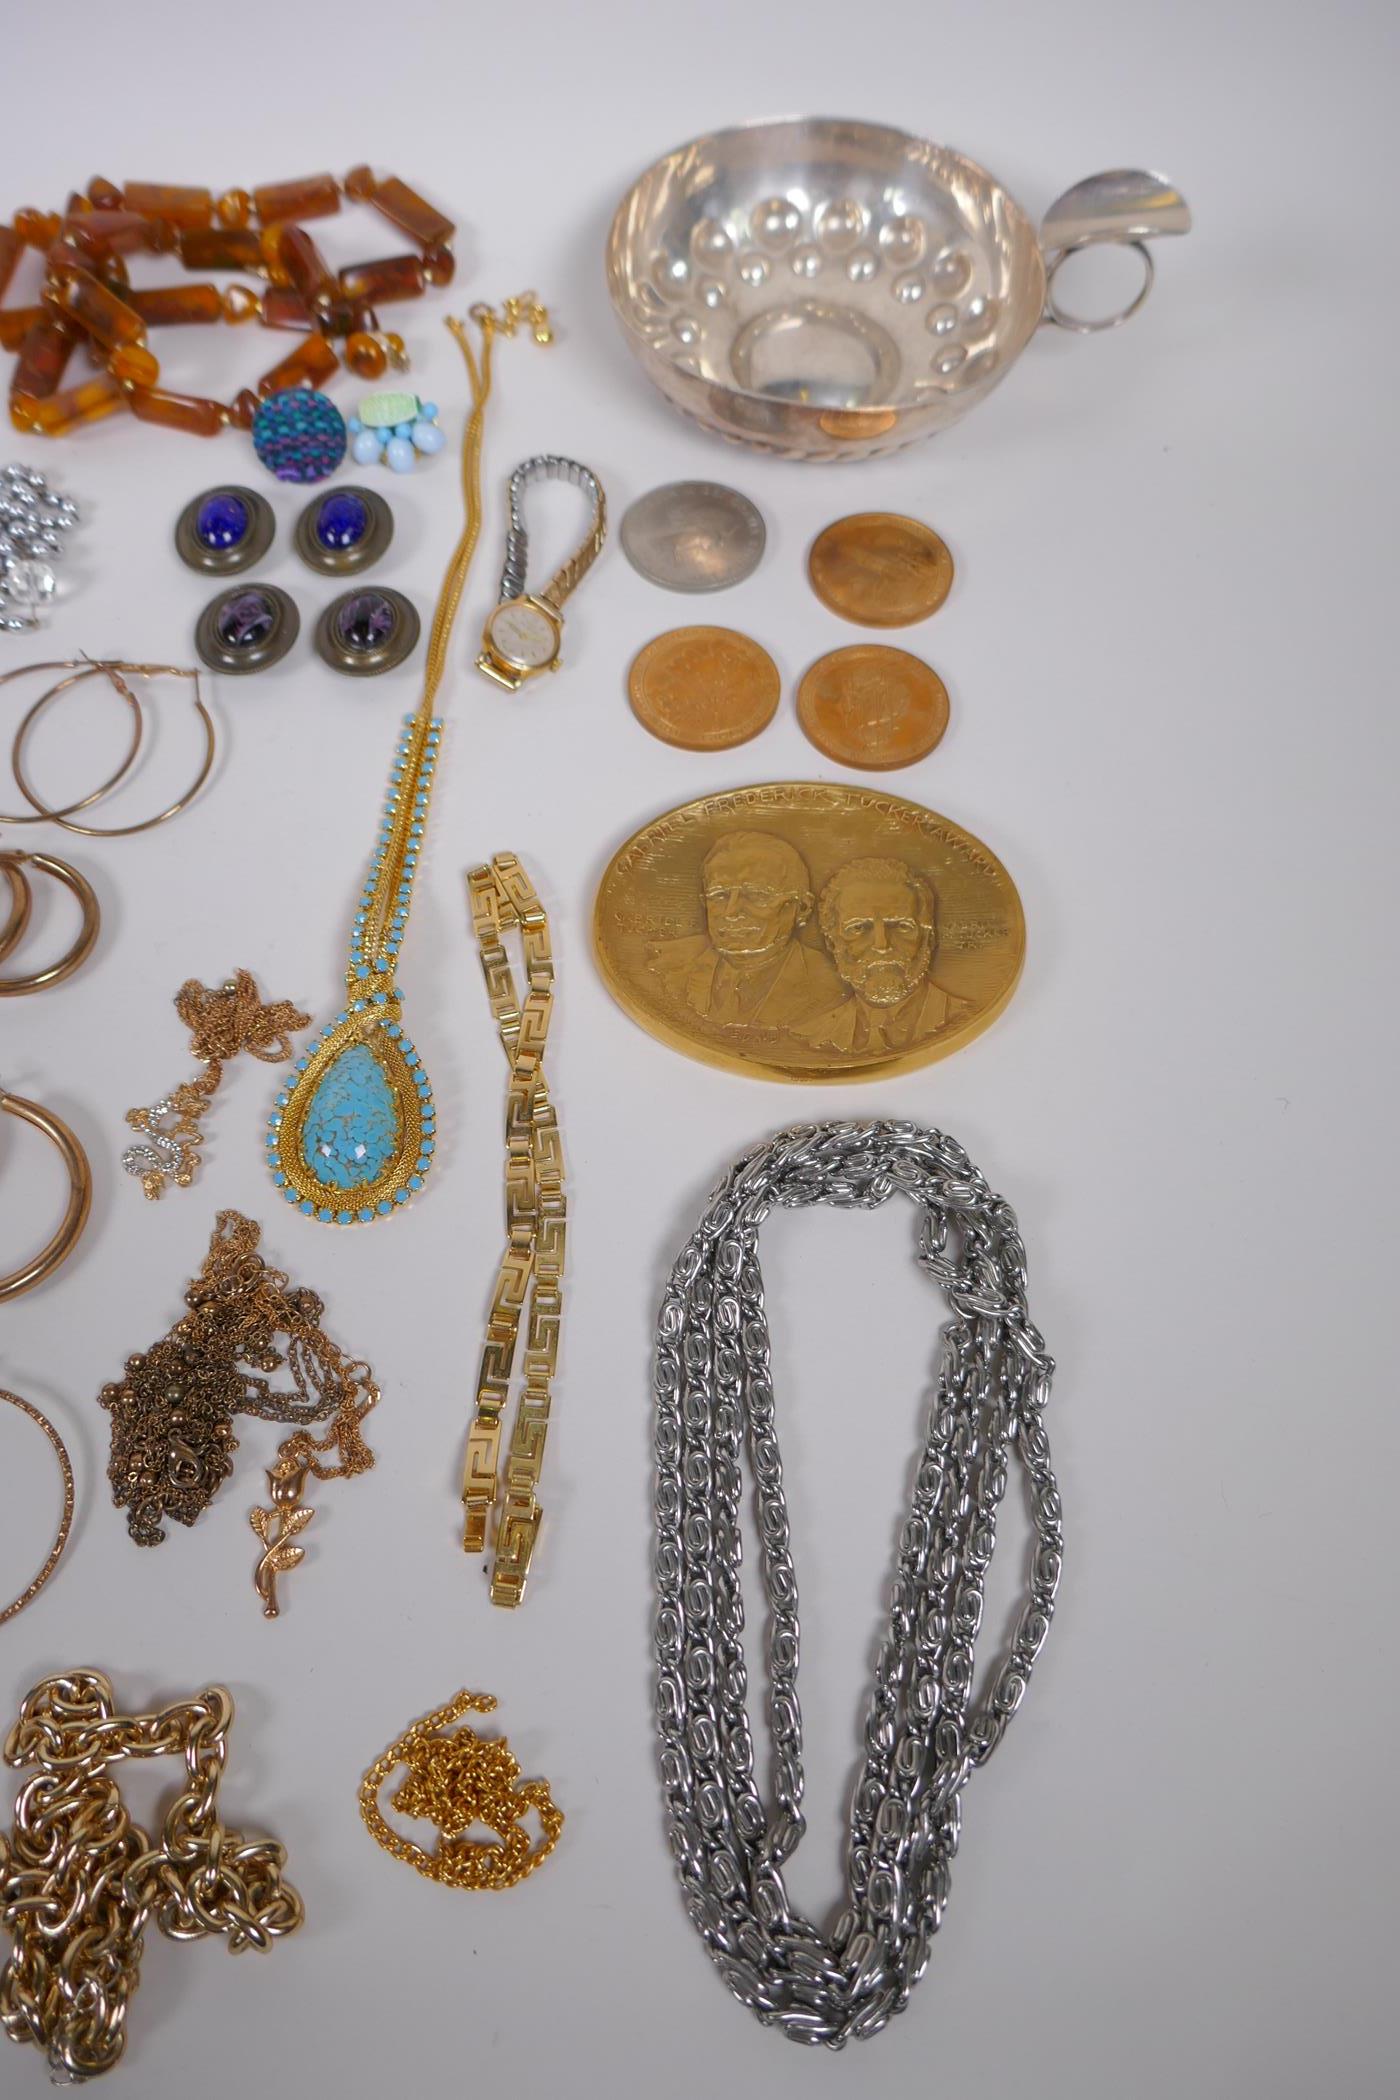 A quantity of vintage costume jewellery including a tiara, bangles, necklaces etc, together with a - Image 6 of 9